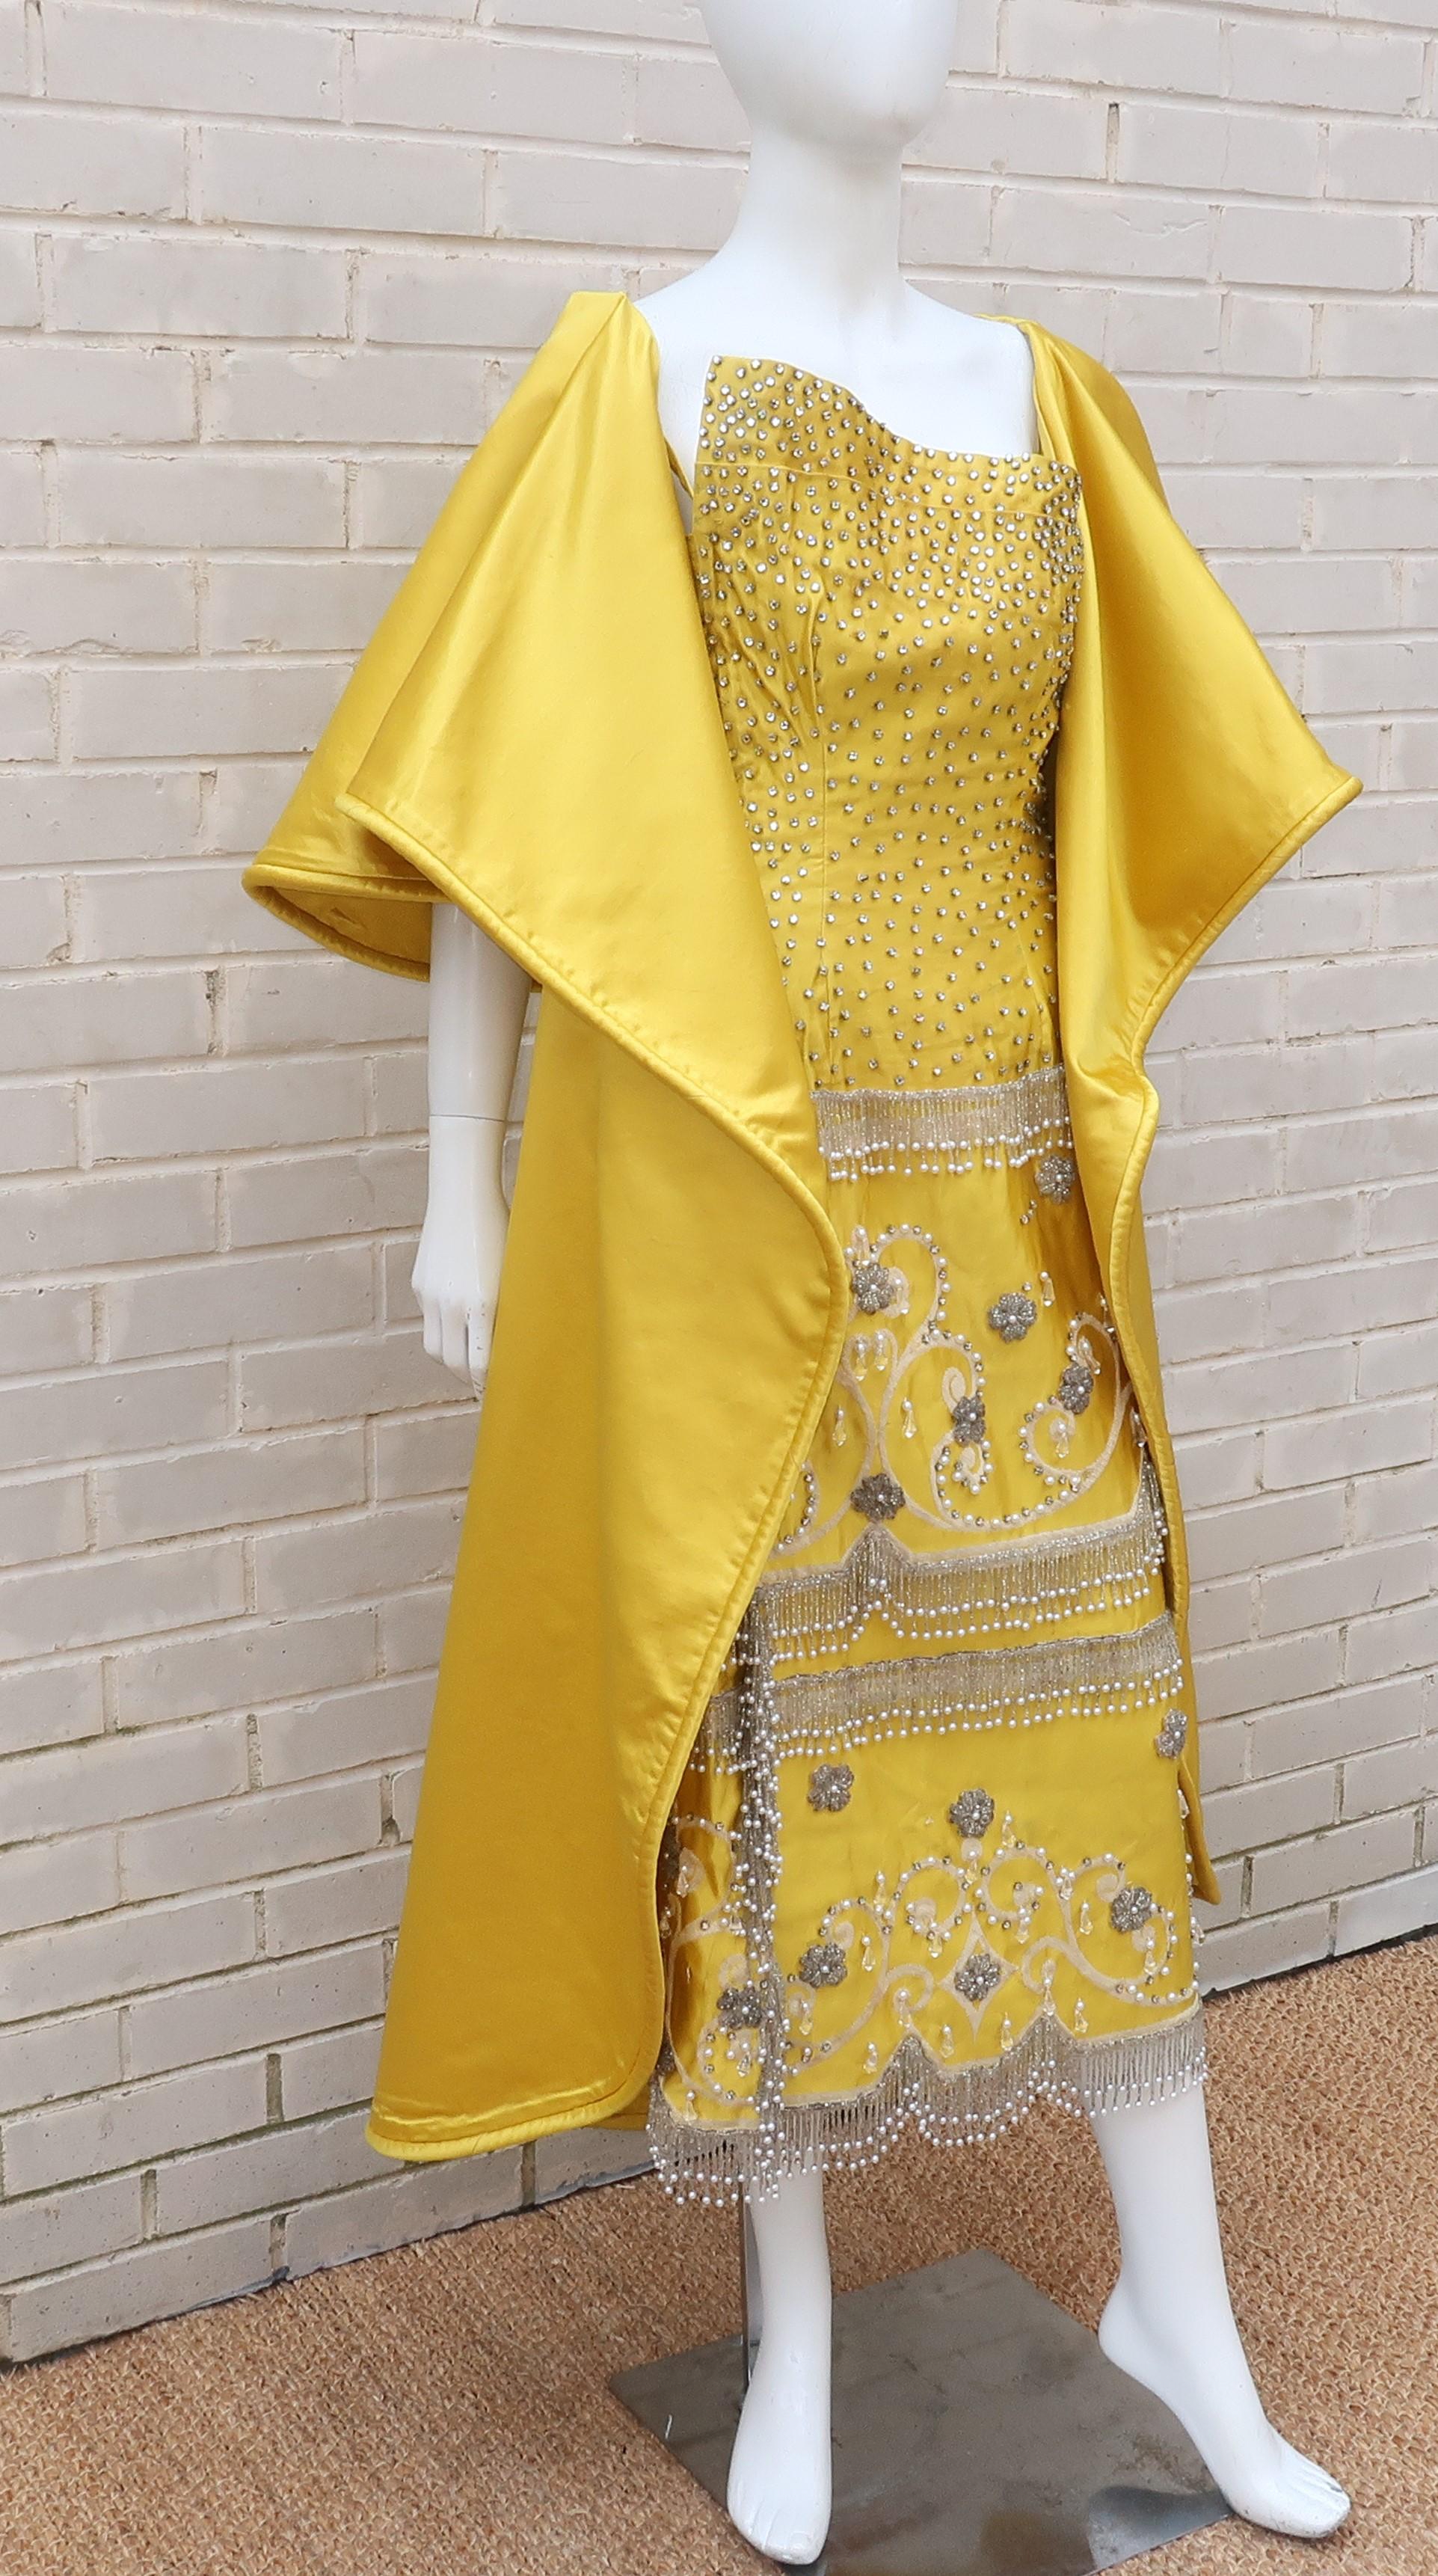 Women's 1950’s Showgirl Style Yellow Satin Beaded Fringed Dress With Wrap Coat